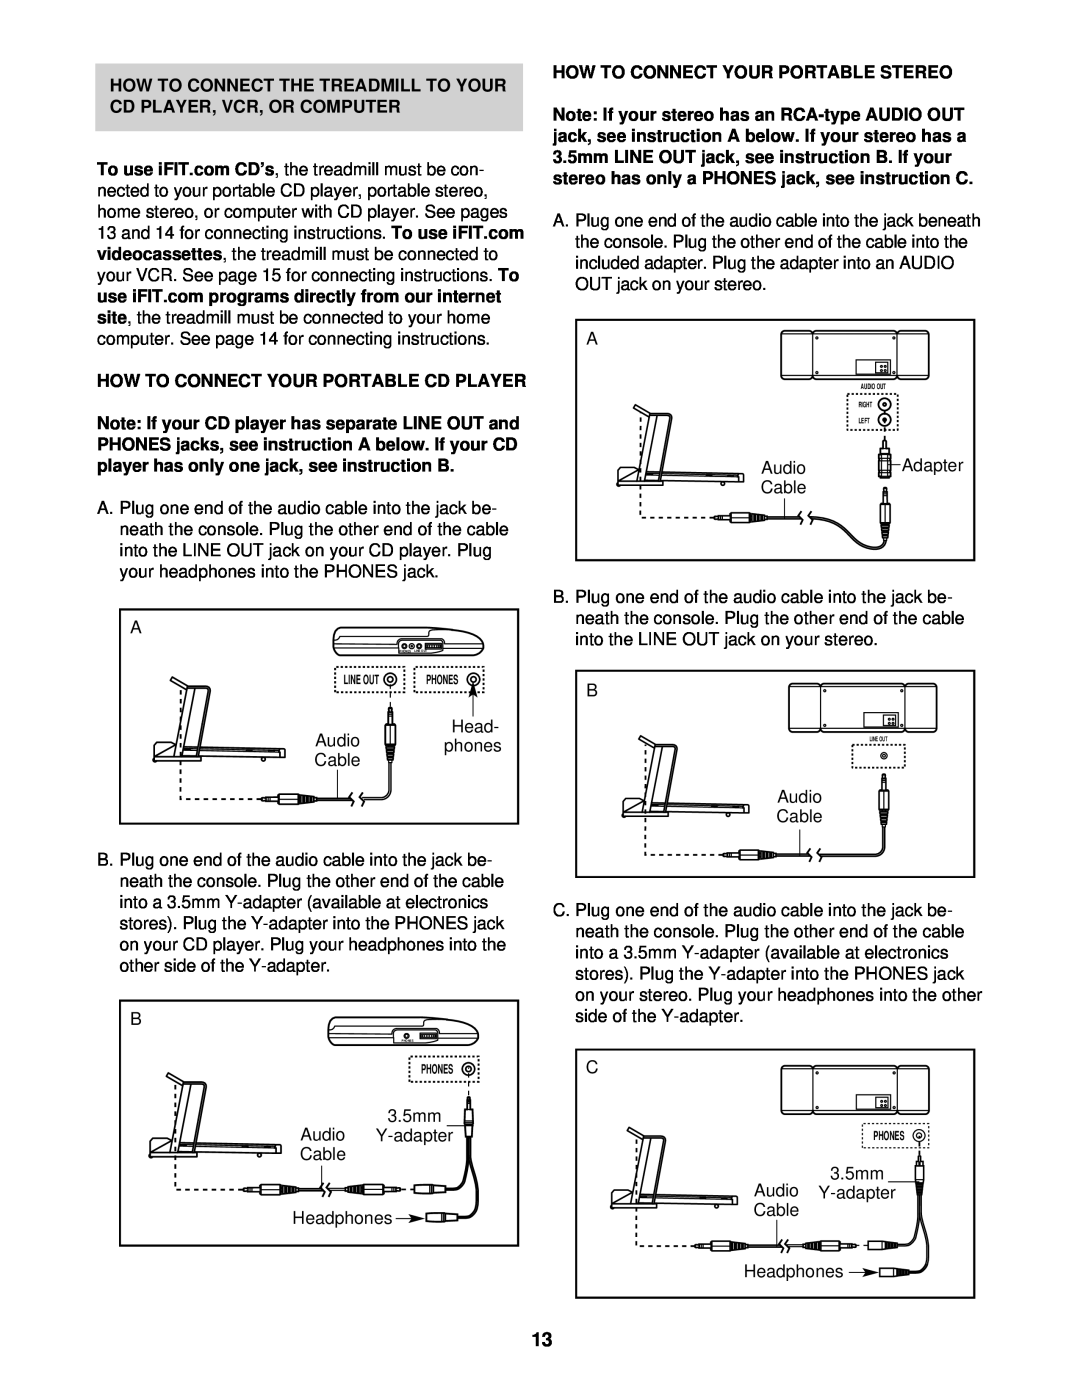 ProForm 831.293040 How To Connect The Treadmill To Your Cd Player, Vcr, Or Computer, How To Connect Your Portable Stereo 